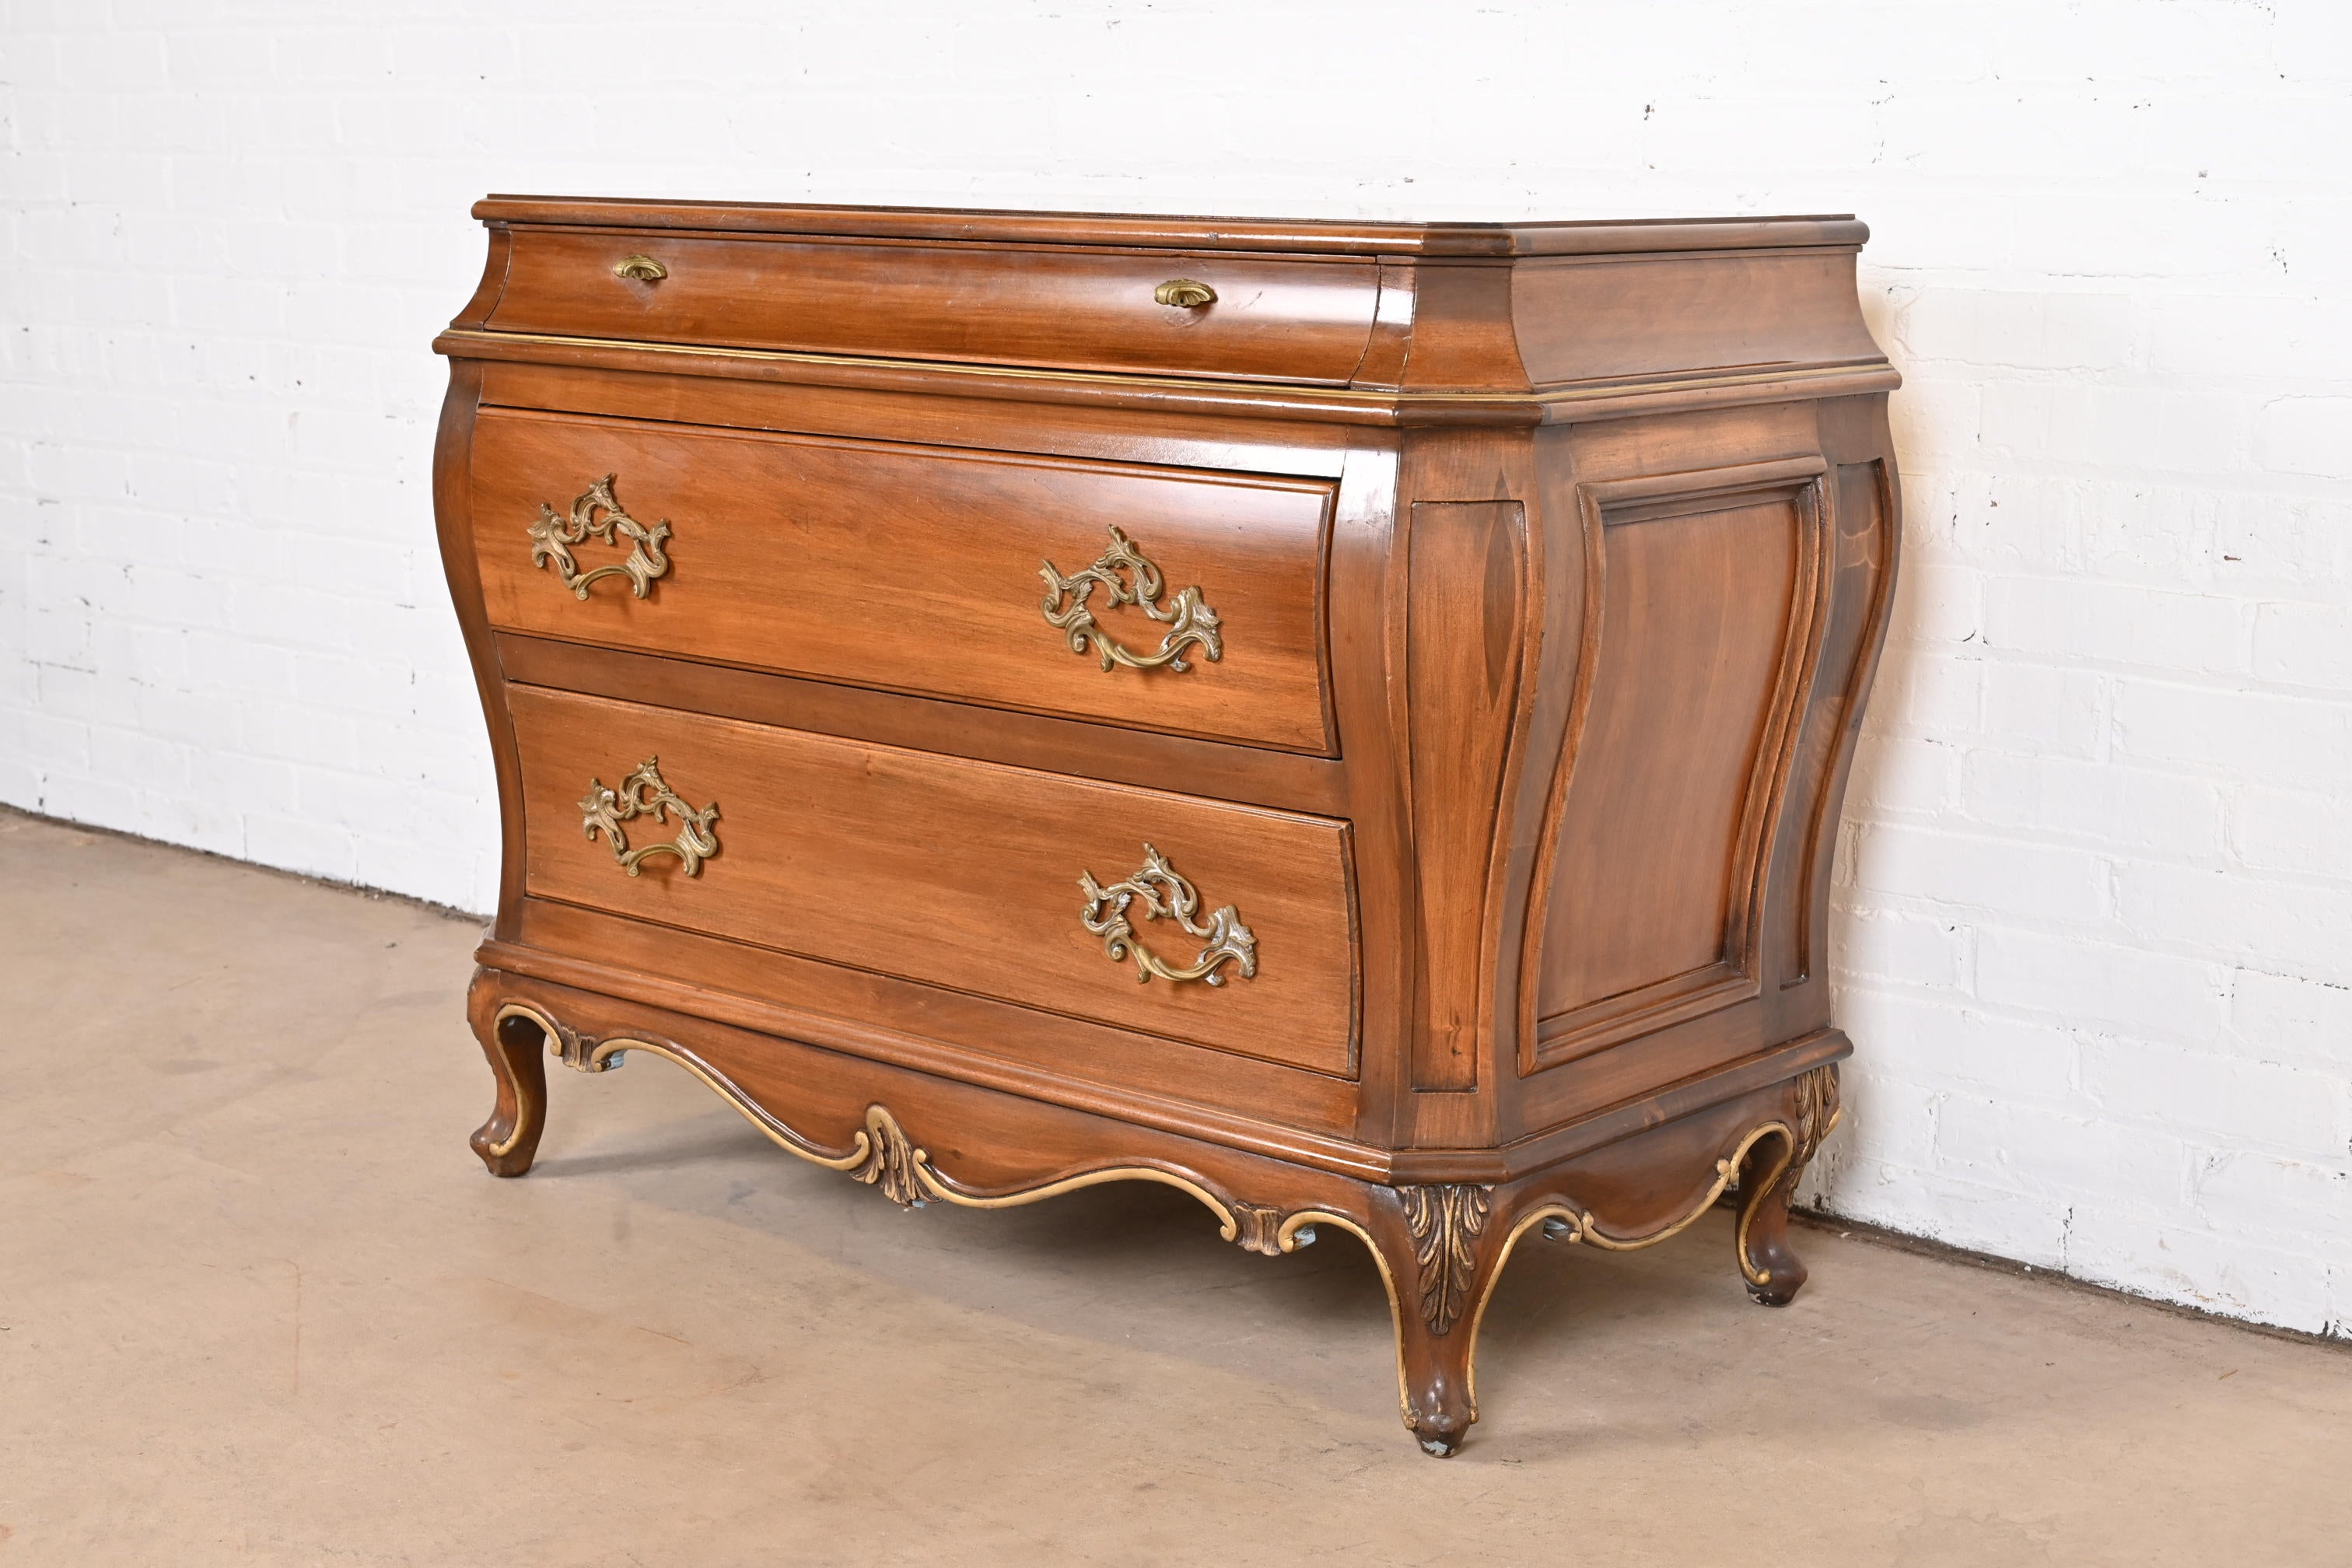 A beautiful French Provincial Louis XV style bombay chest of drawers or commode

By Karges Furniture

USA, Late 20th Century

Carved walnut, with gold gilt details and original brass hardware.

Measures: 43